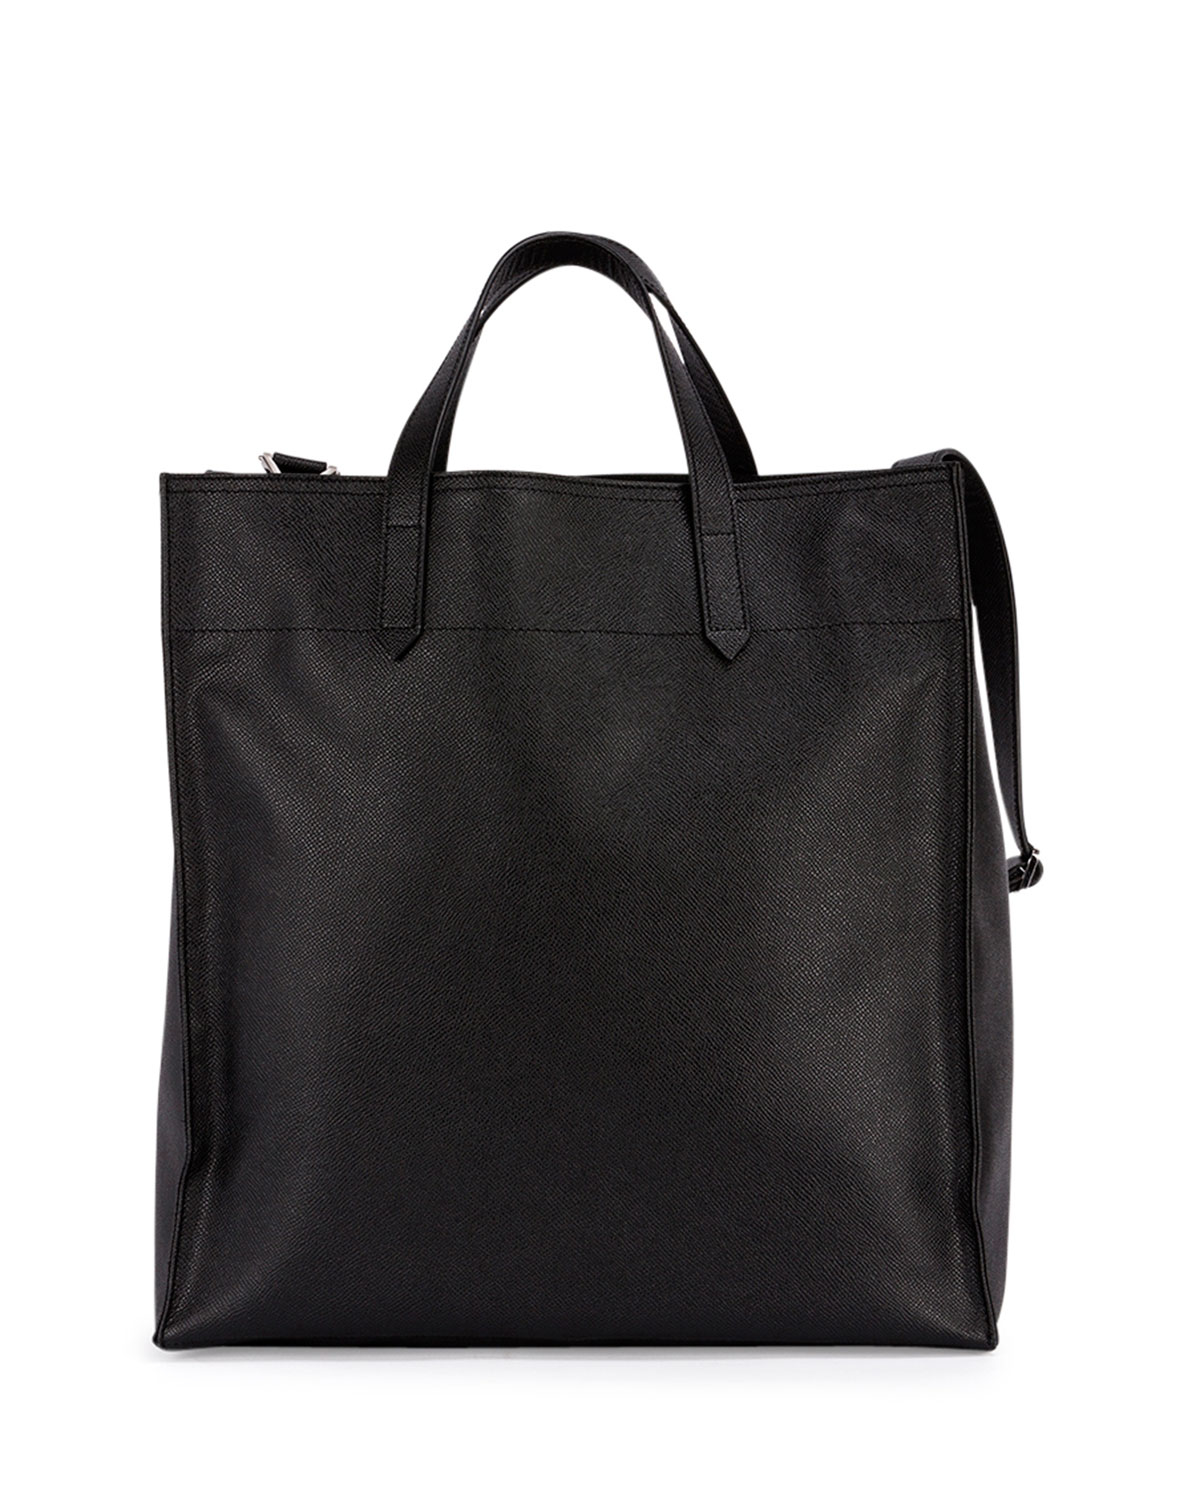 Lyst - Givenchy Men's Logo Print Leather Tote Bag in Black